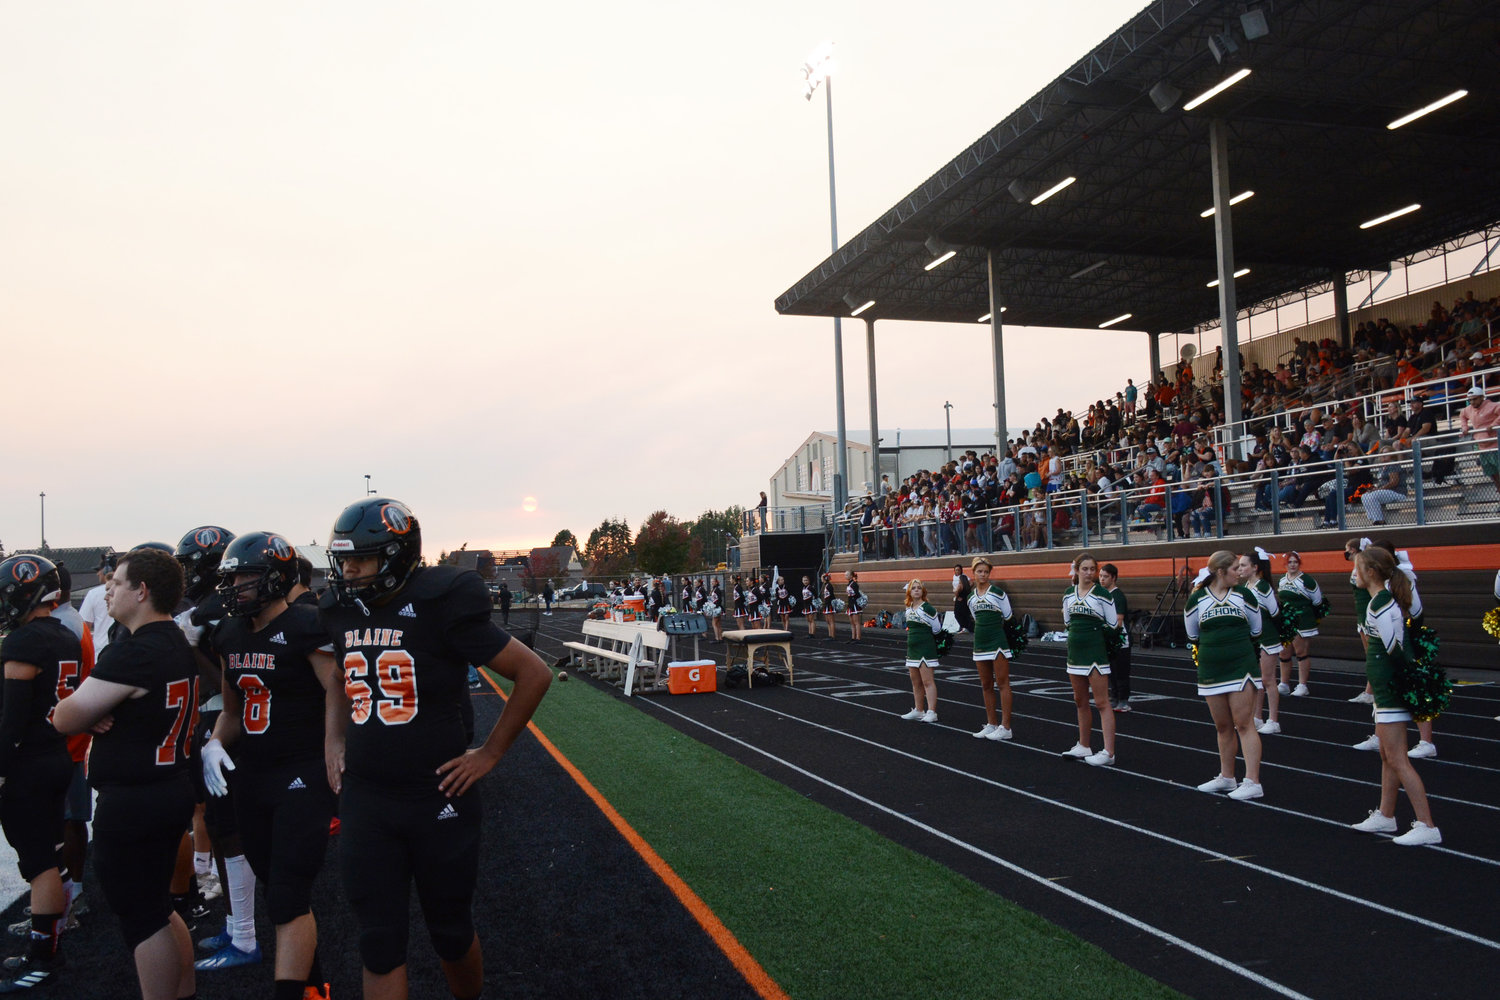 Smoky skies loomed over Blaine football’s home-opening defeat to Sehome September 9.